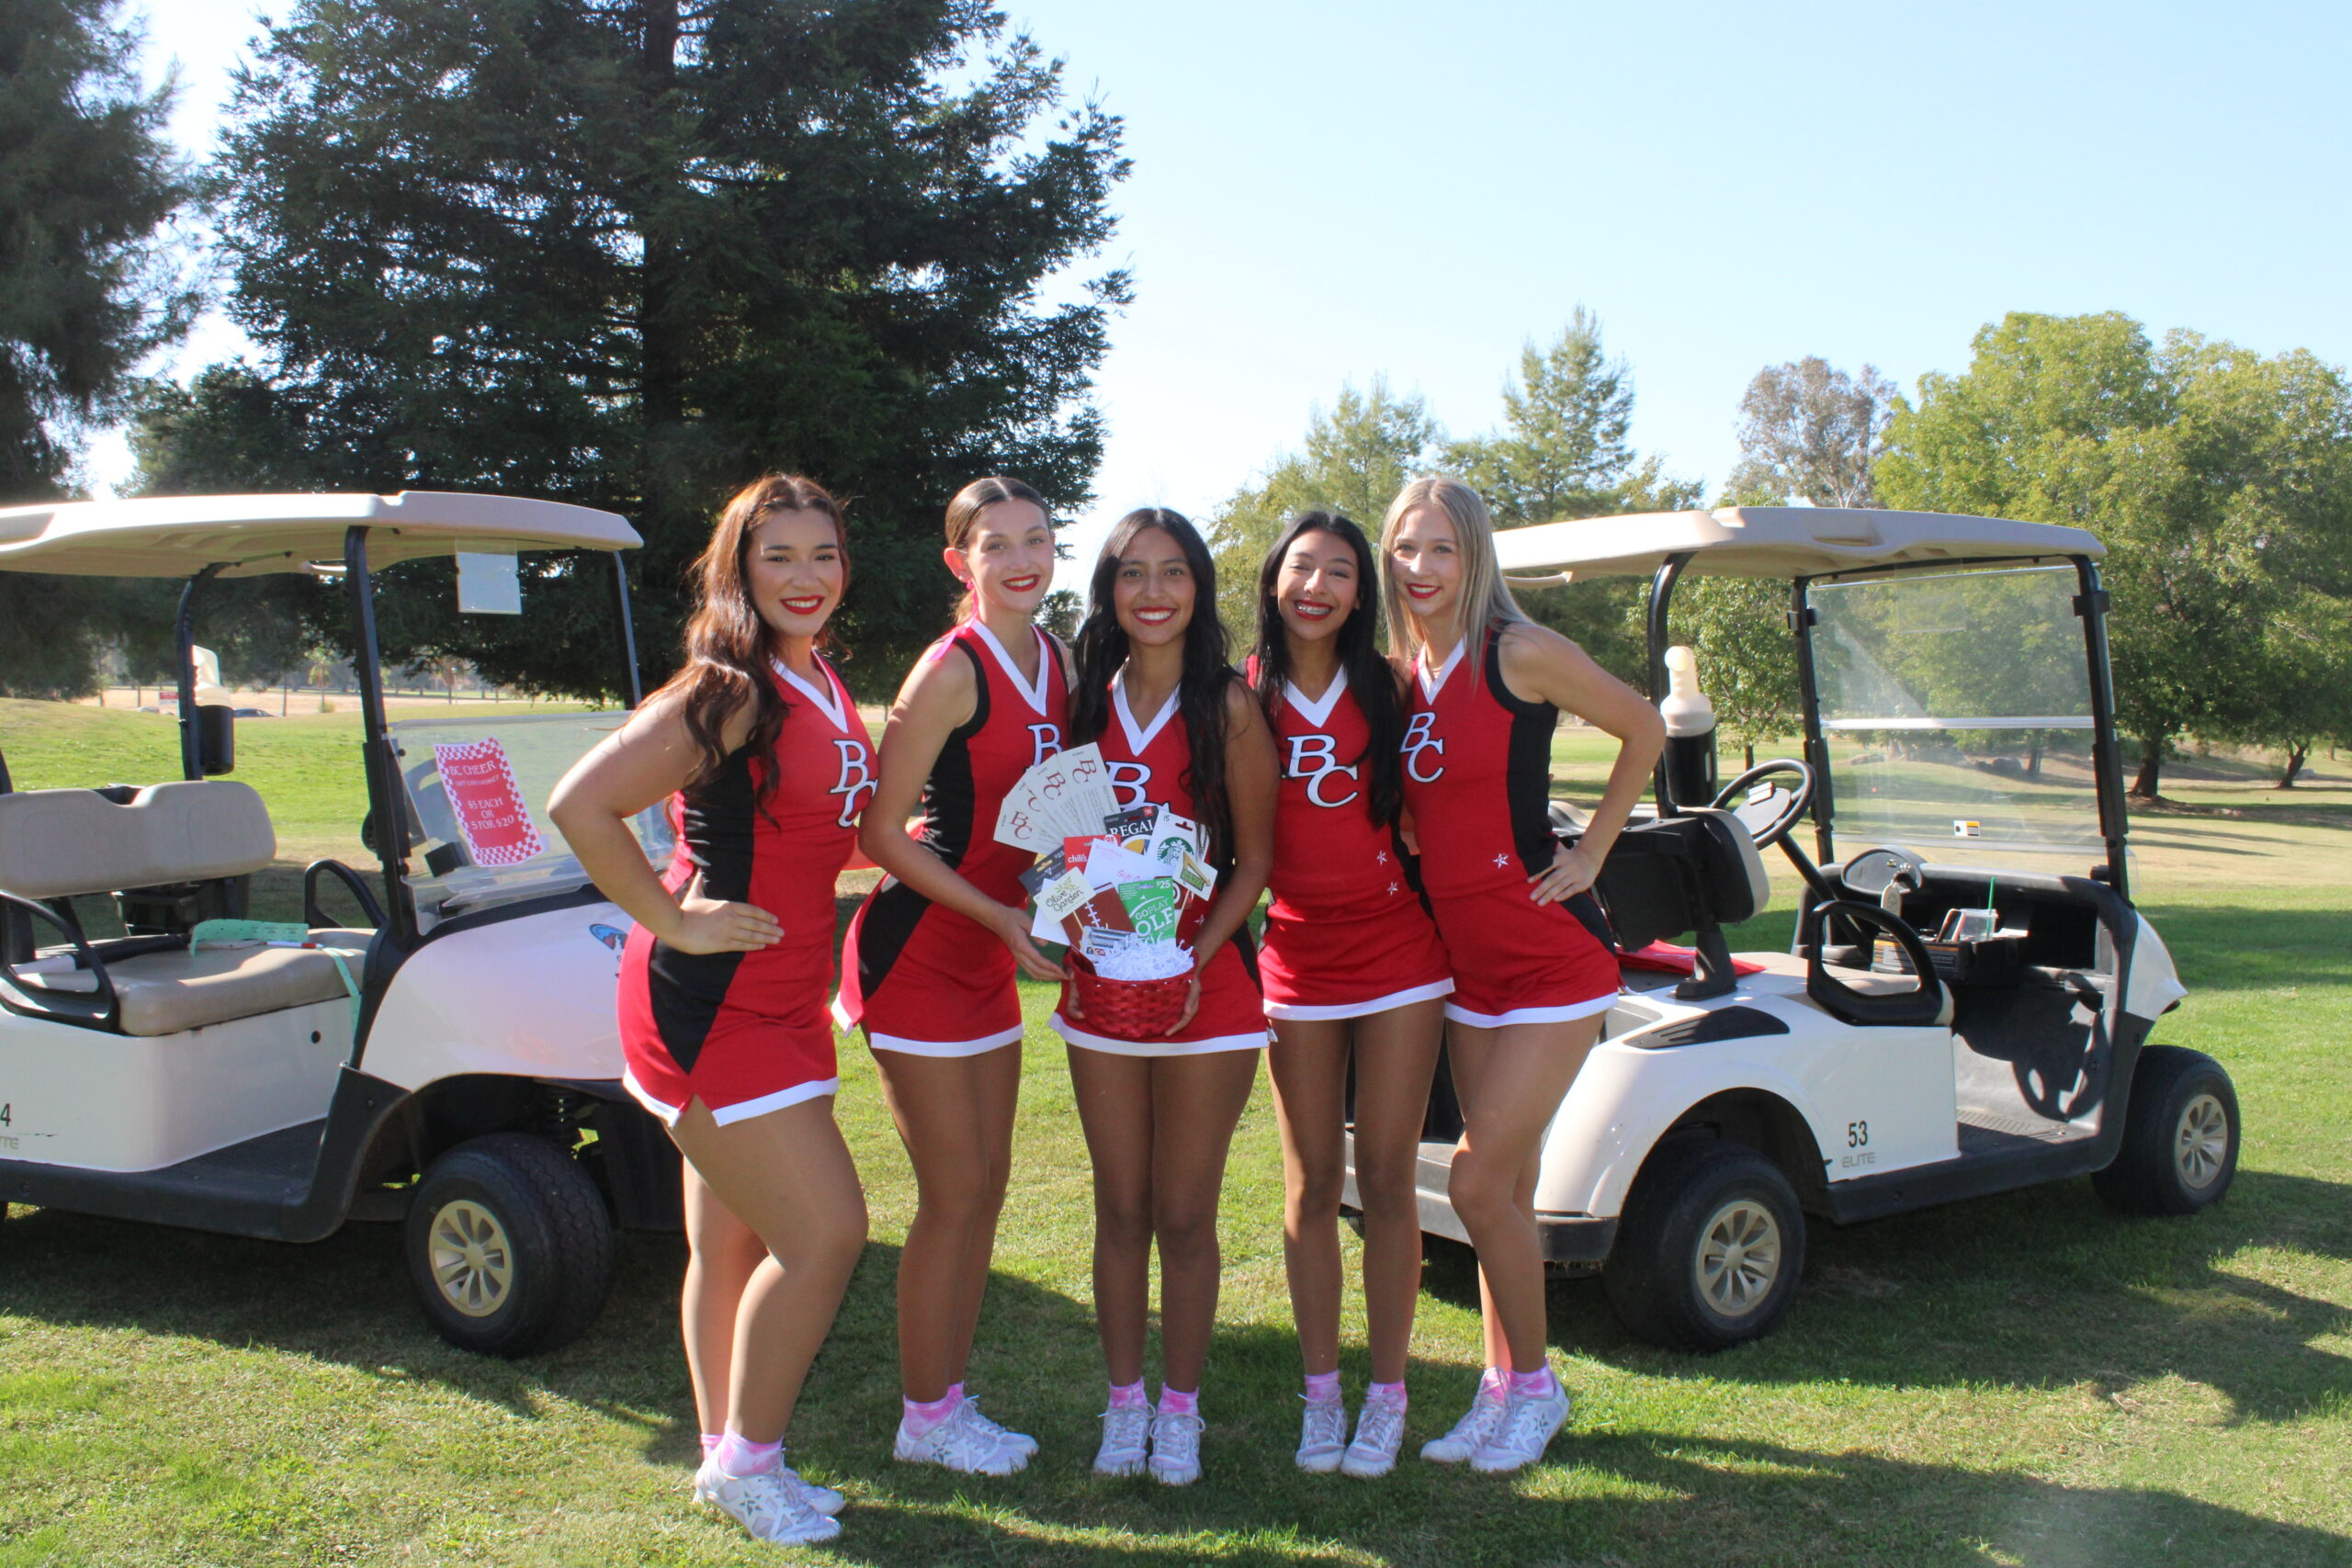 Cheerleaders in front of golf carts holding a raffle basket